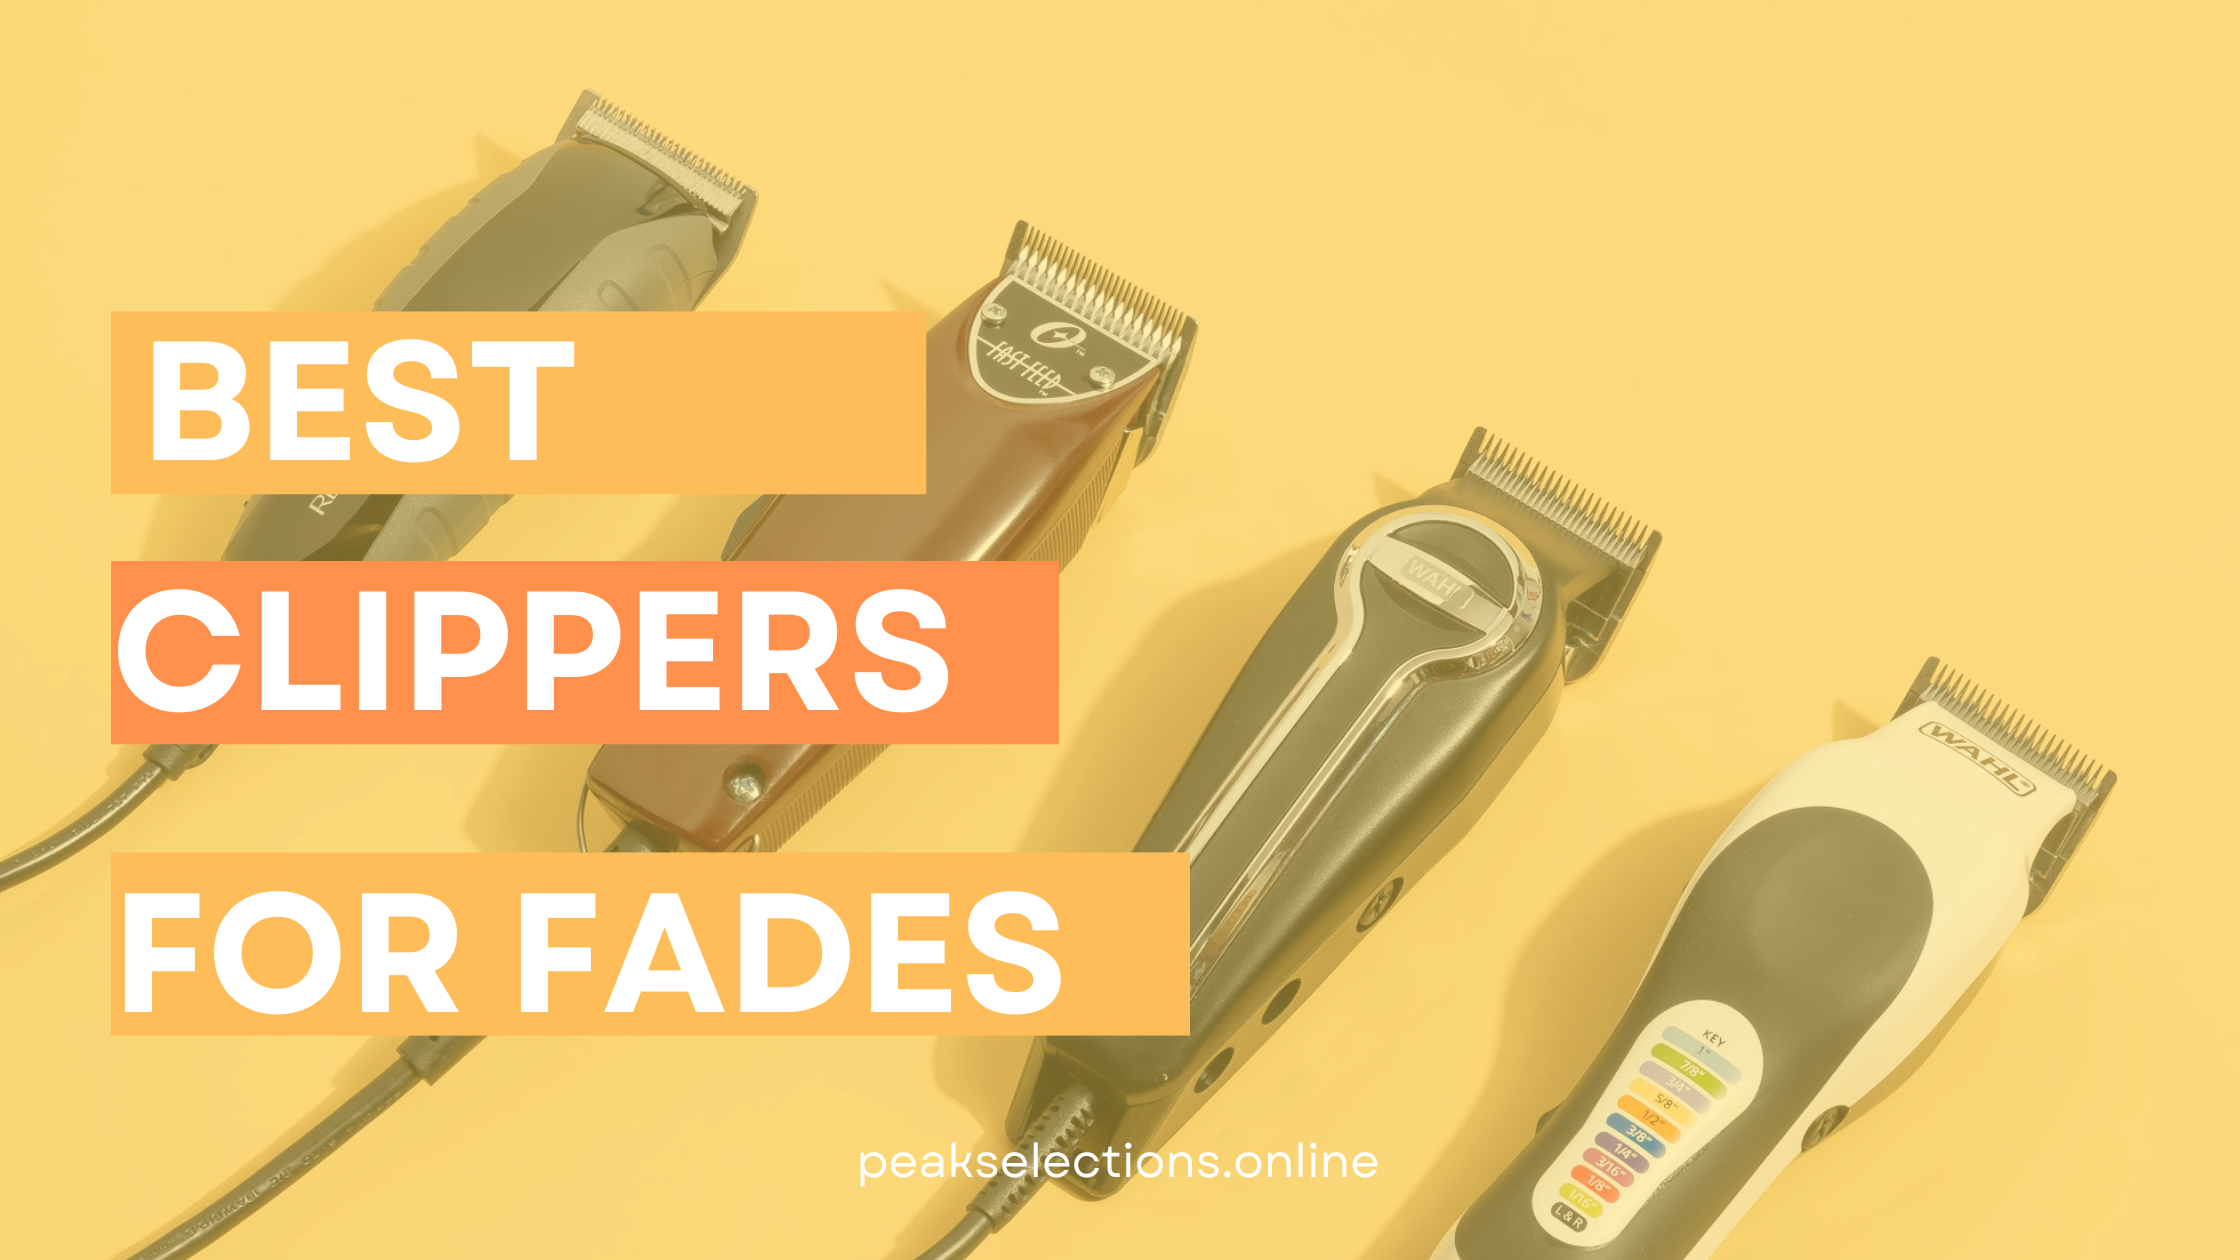 Best Clippers for fades